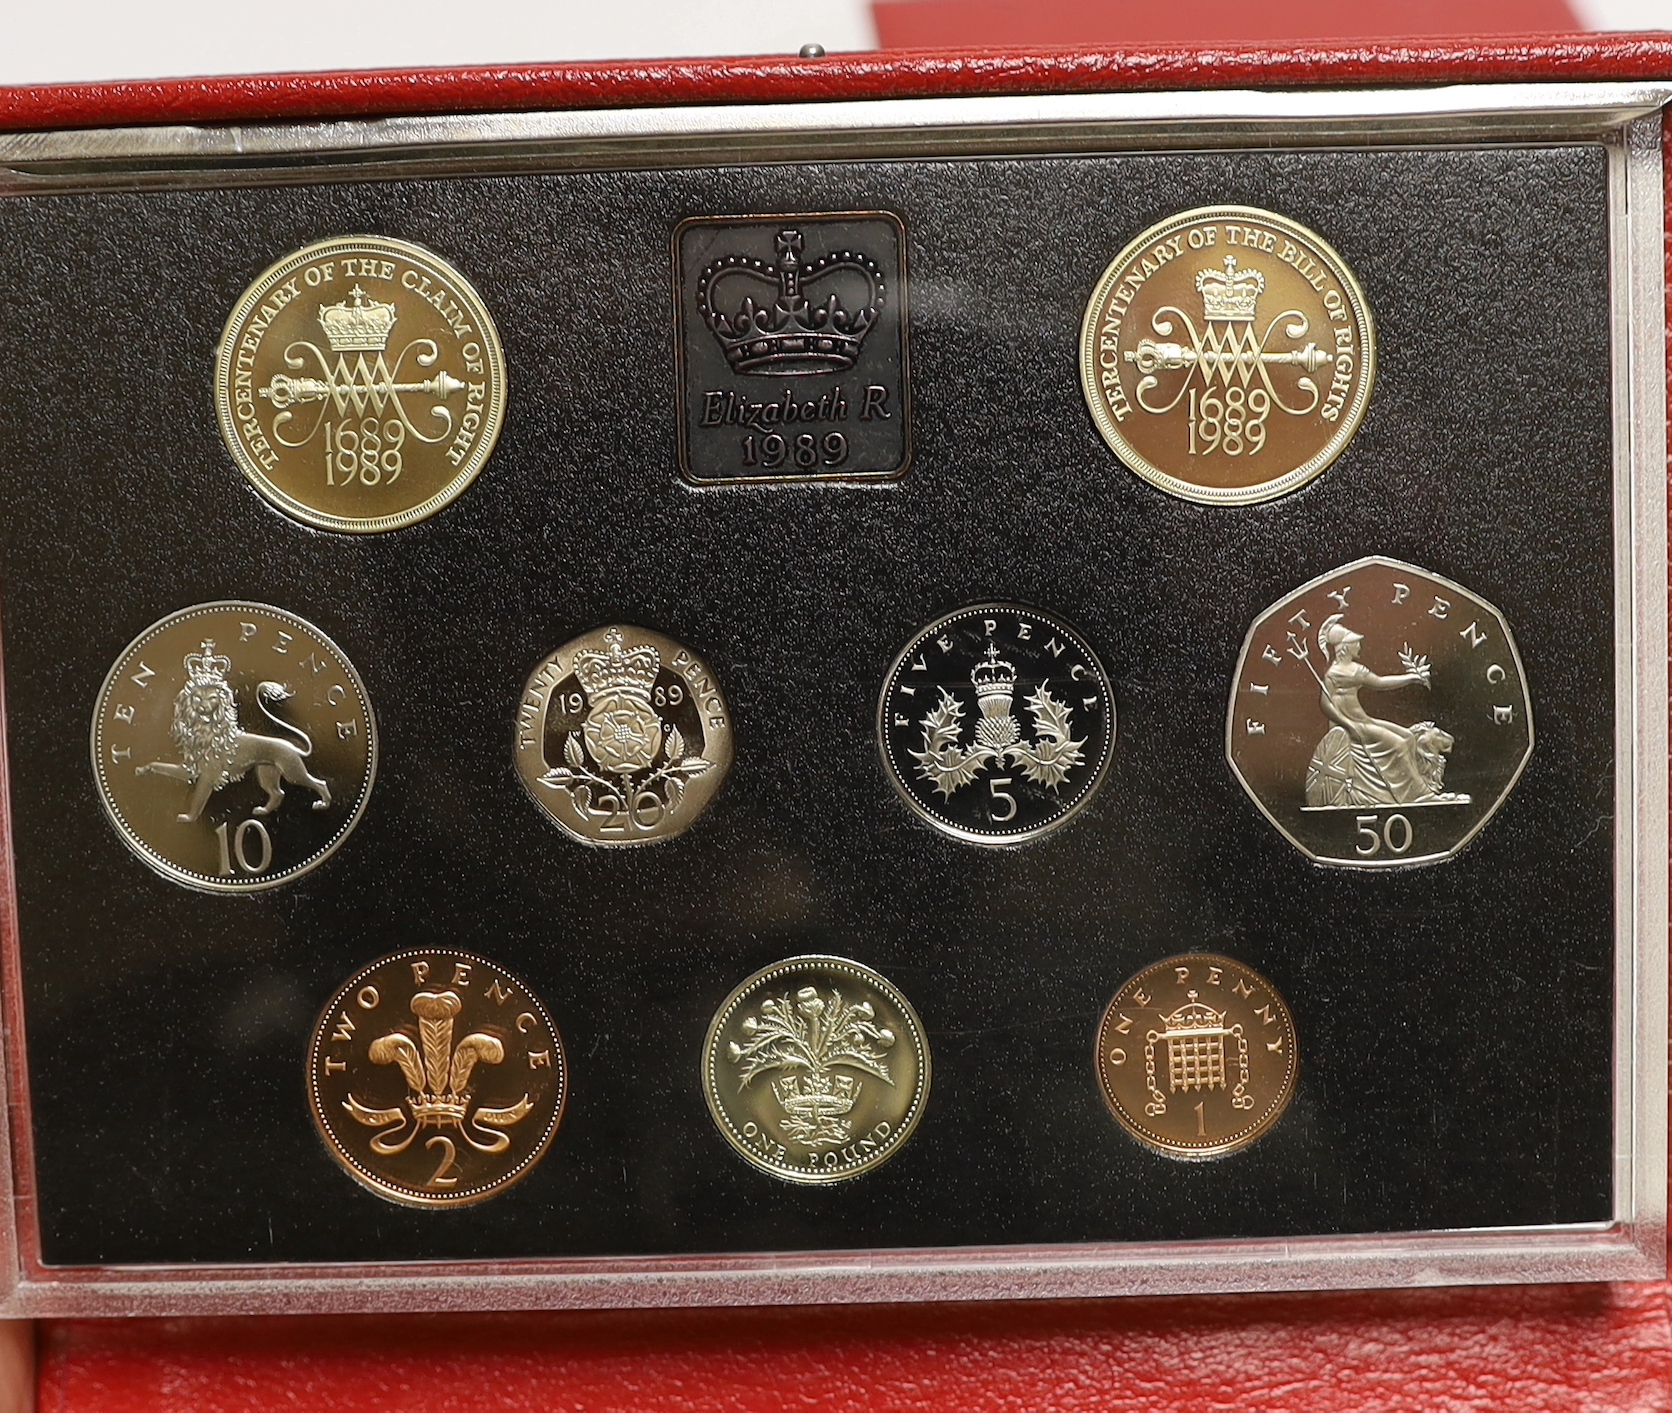 Royal Mint, QEII coins, nine GB proof coin year sets, 1983-1988 and 1989 x 2